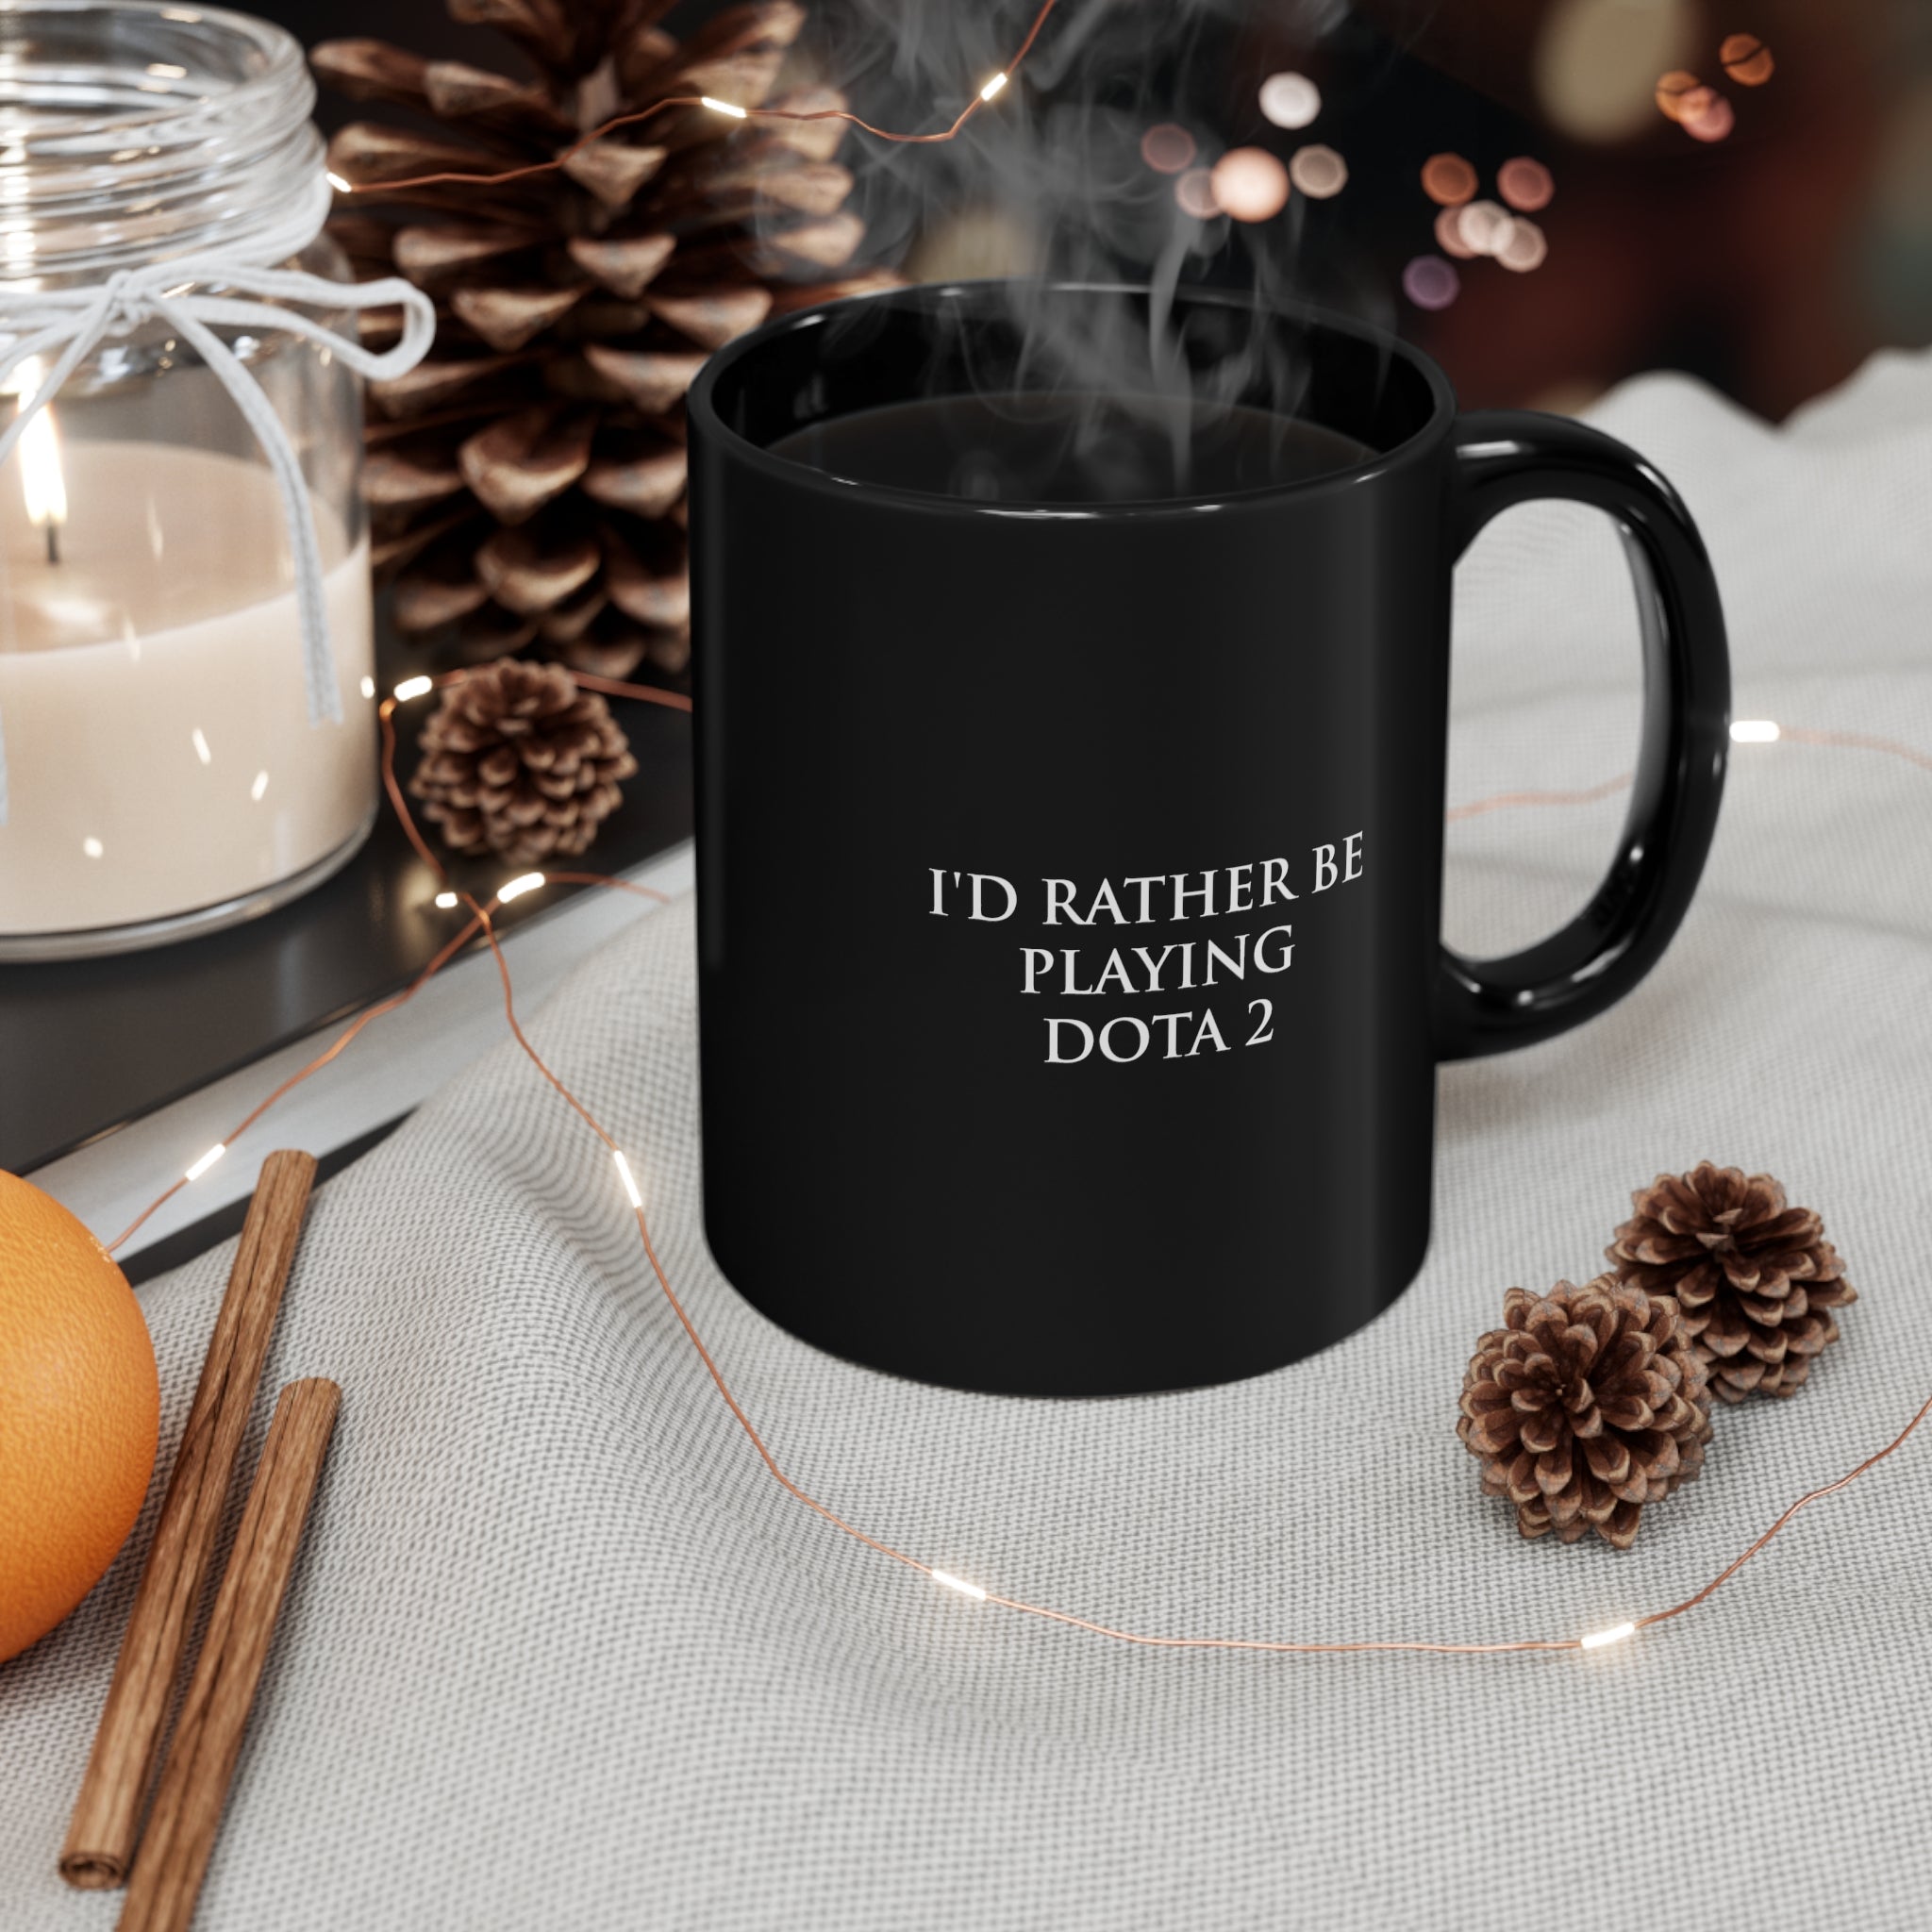 Dota 2 I'd Rather Be Playing Black Mug (11oz, 15oz) Cups Mugs Cup Gamer Gift For Him Her Game Cup Cups Mugs Birthday Christmas Valentine's Anniversary Gifts